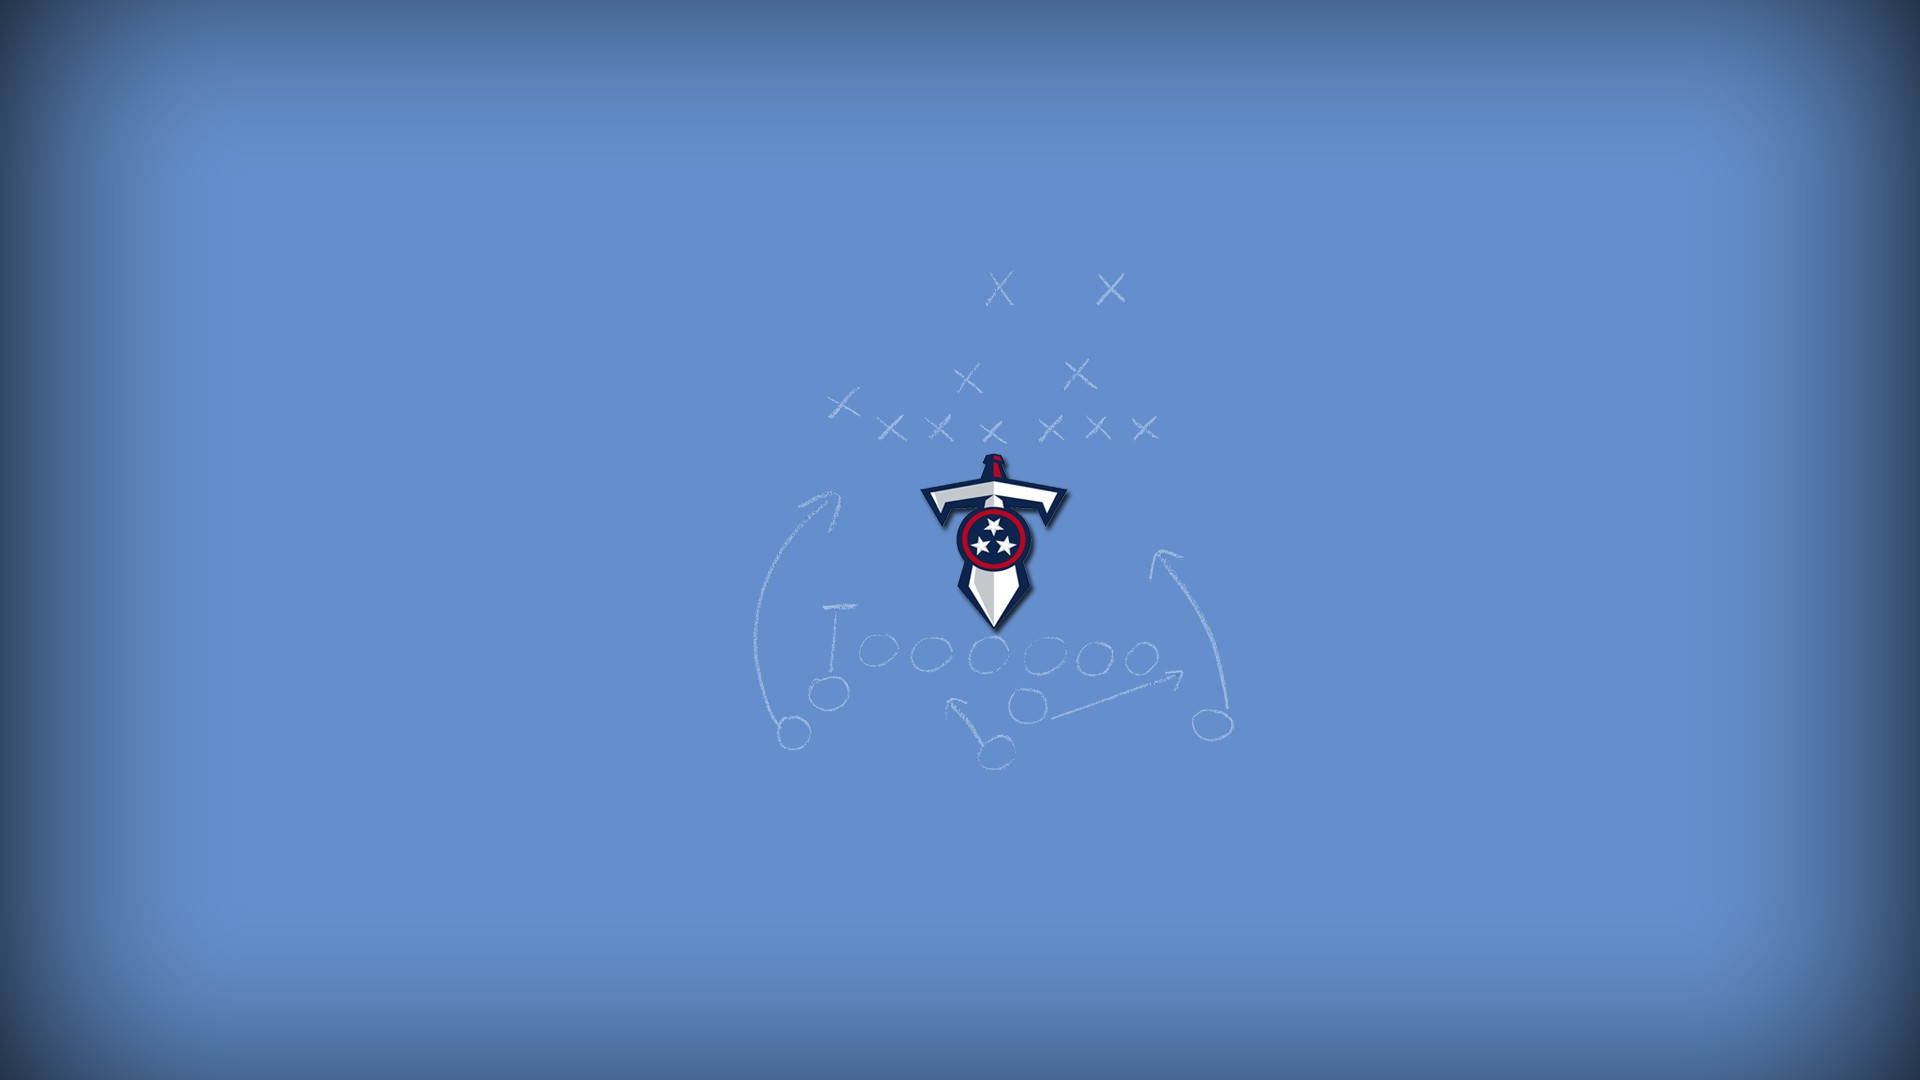 HD Tennessee Titans Backgrounds With high-resolution 1920X1080 pixel. Download and set as wallpaper for Desktop Computer, Apple iPhone X, XS Max, XR, 8, 7, 6, SE, iPad, Android